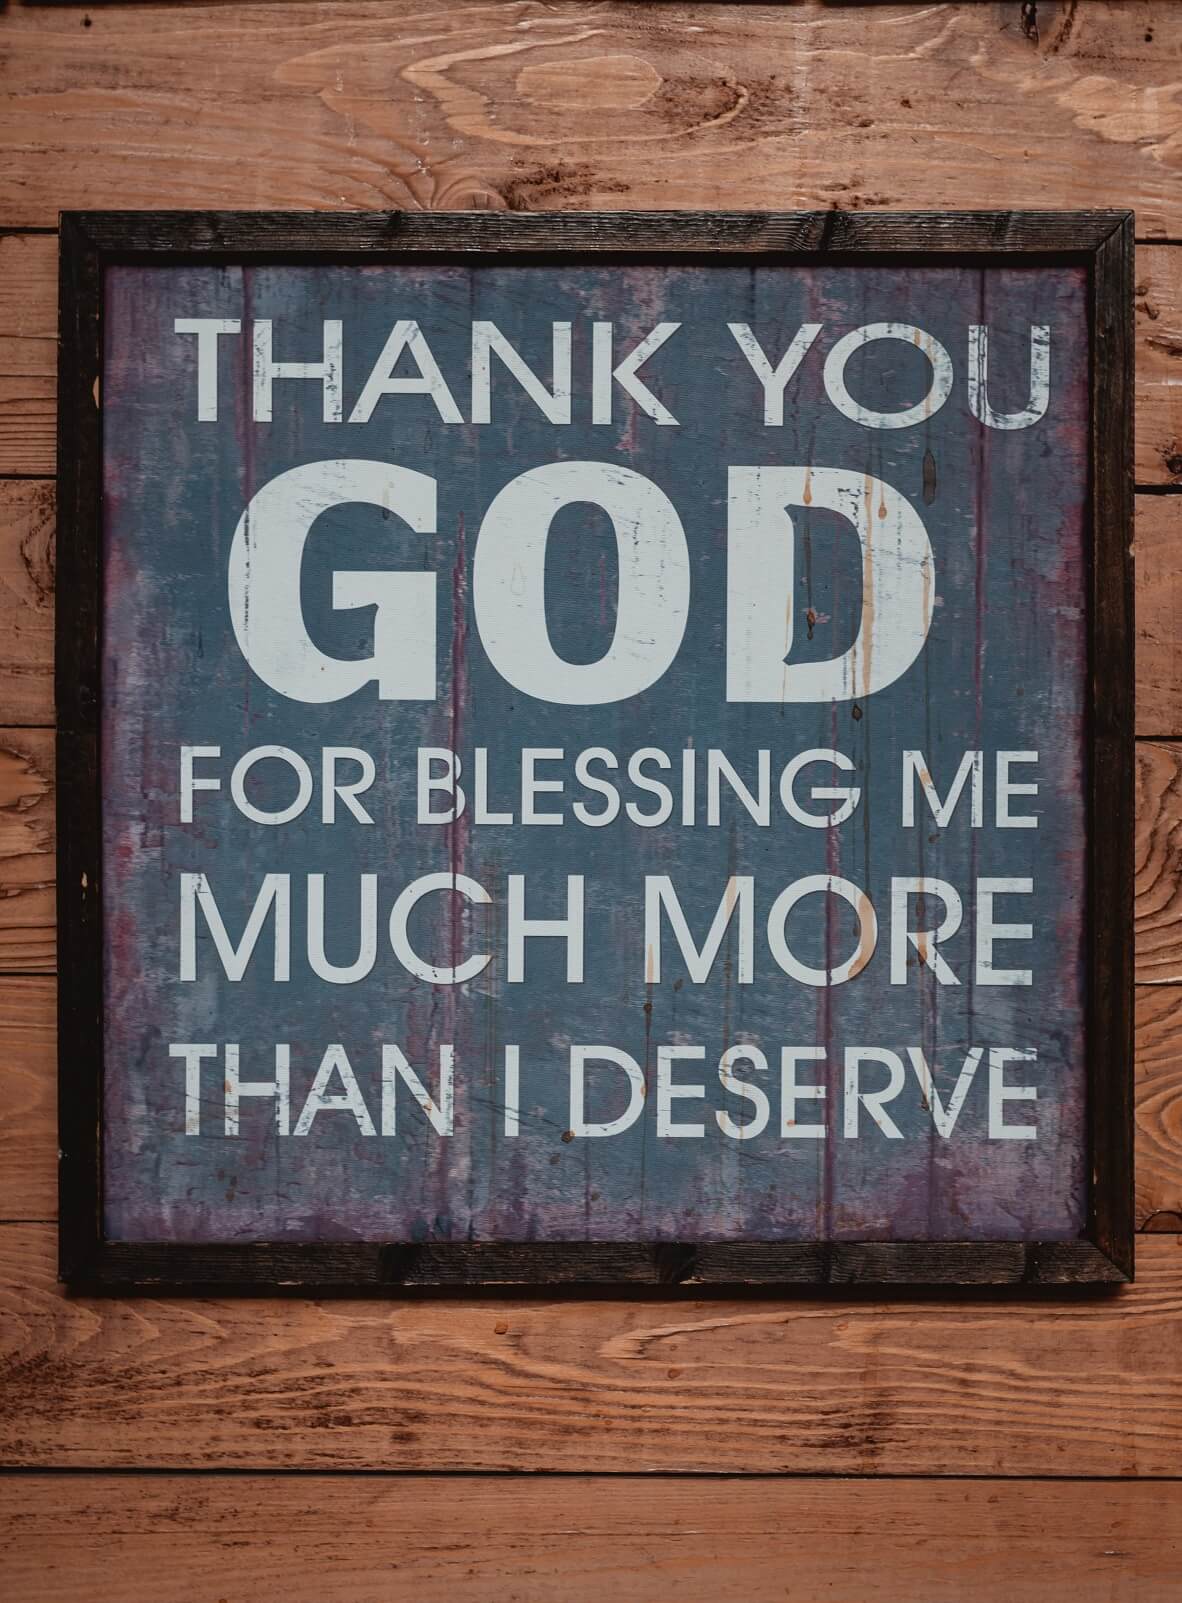 Image with words written - thank you God for blessing me much more than I deserve